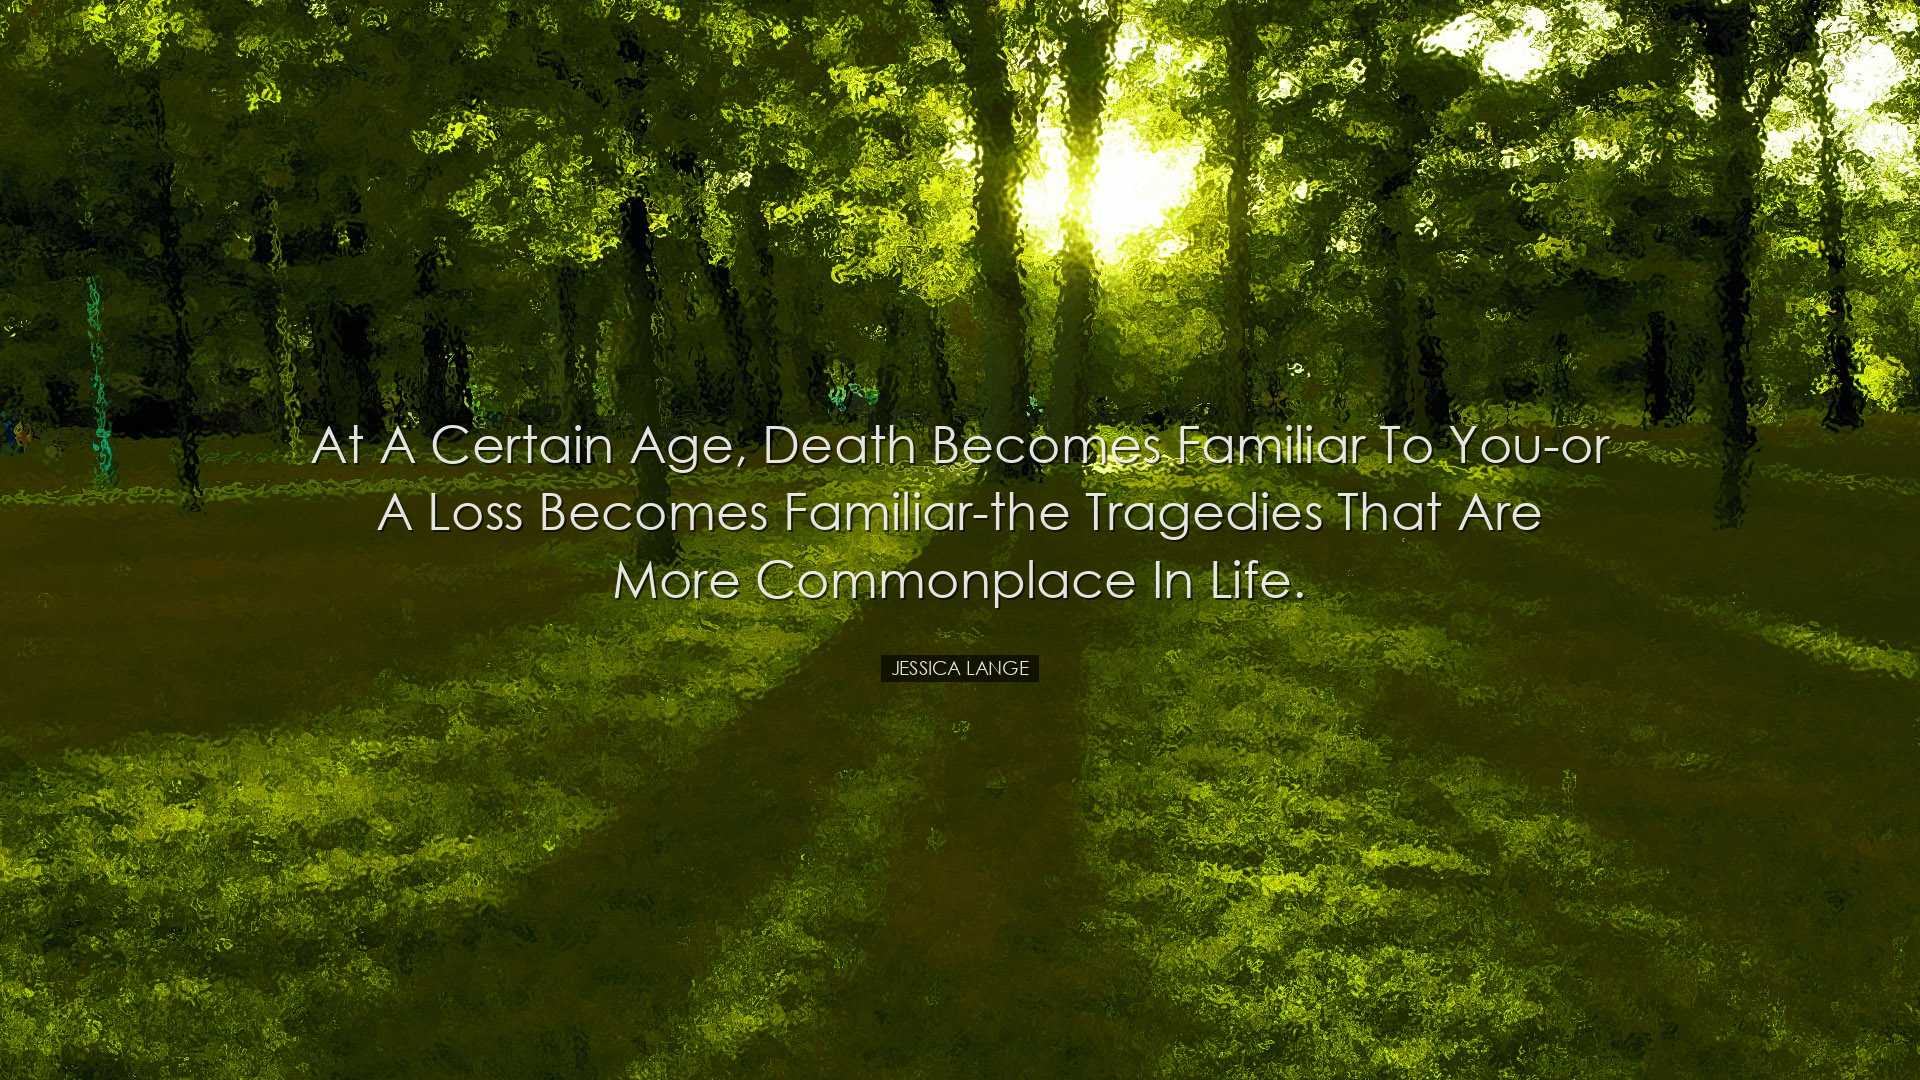 At a certain age, death becomes familiar to you-or a loss becomes